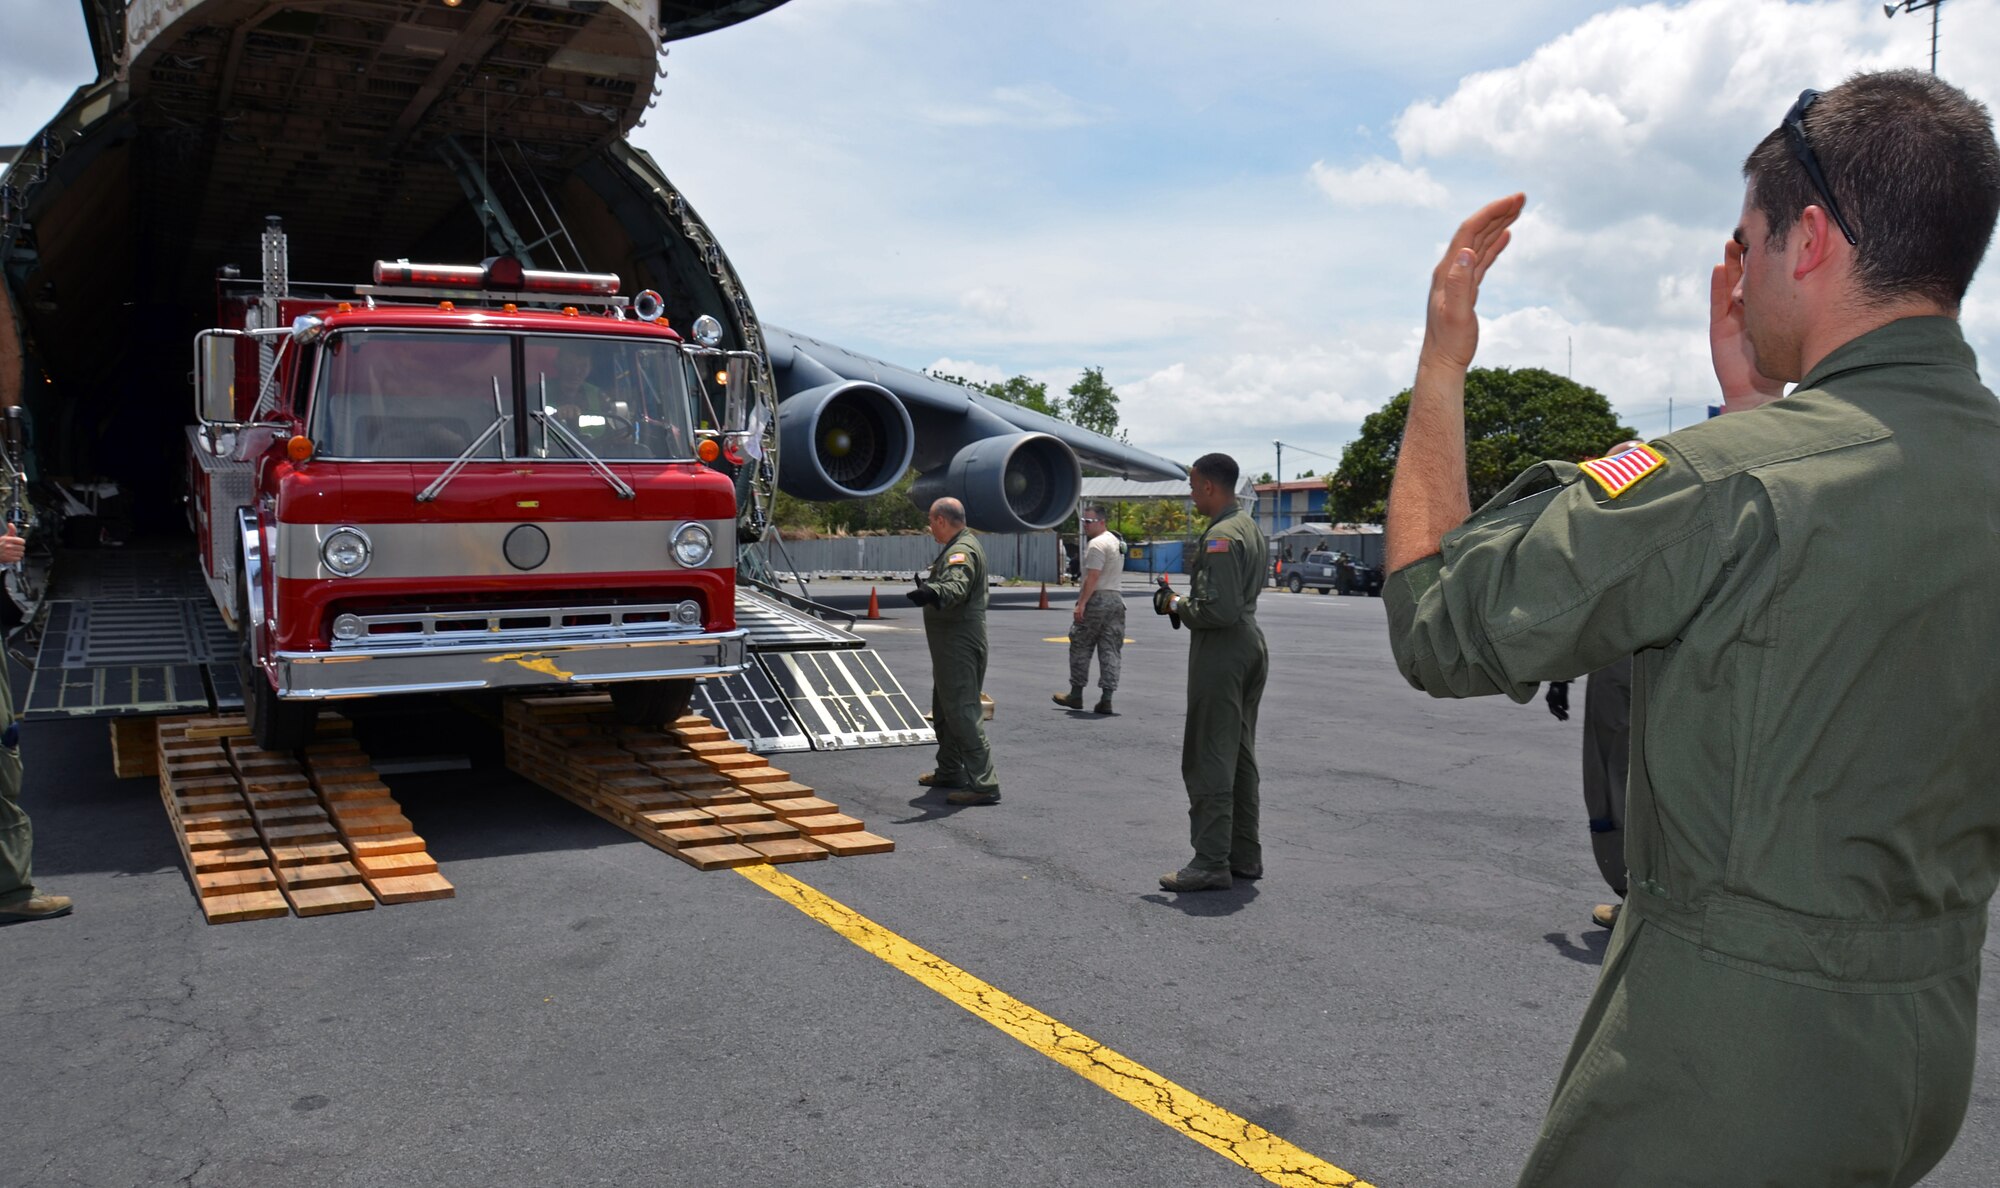 SrA. Michael Niccoll, 337th Airlift Squadron Loadmaster, marshals a fire truck off the Westover C-5, June 10, 2014 in Managua Nicaragua. This Denton Amendment mission delivered an ambulance and two fire truck vehicles to Nicaragua June 10 on behalf of the Wisconsin/Nicaragua Partners of the Americas Incorporated. (U.S. Air Force photo/SSgt. Kelly Goonan)